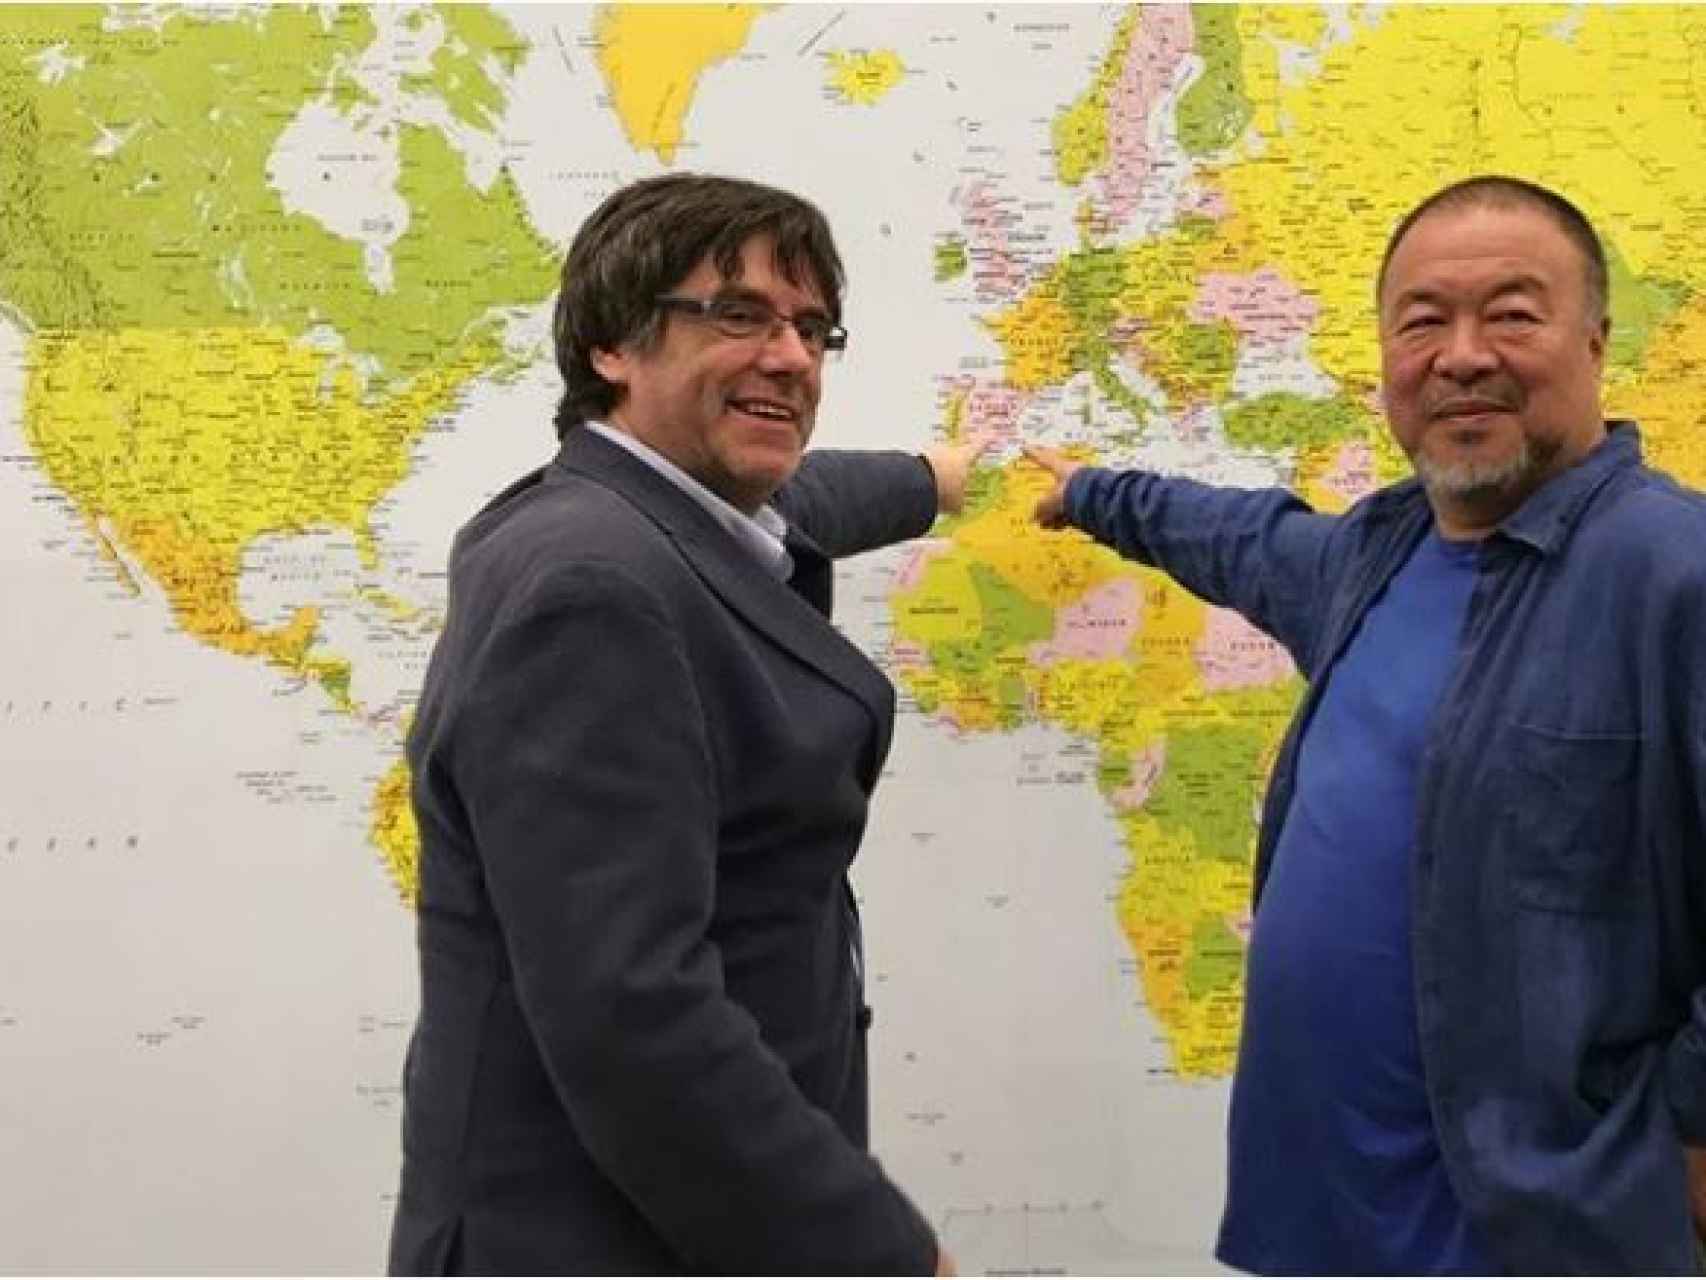 Ai Weiwei con Carles Puigdemont y viceversa.